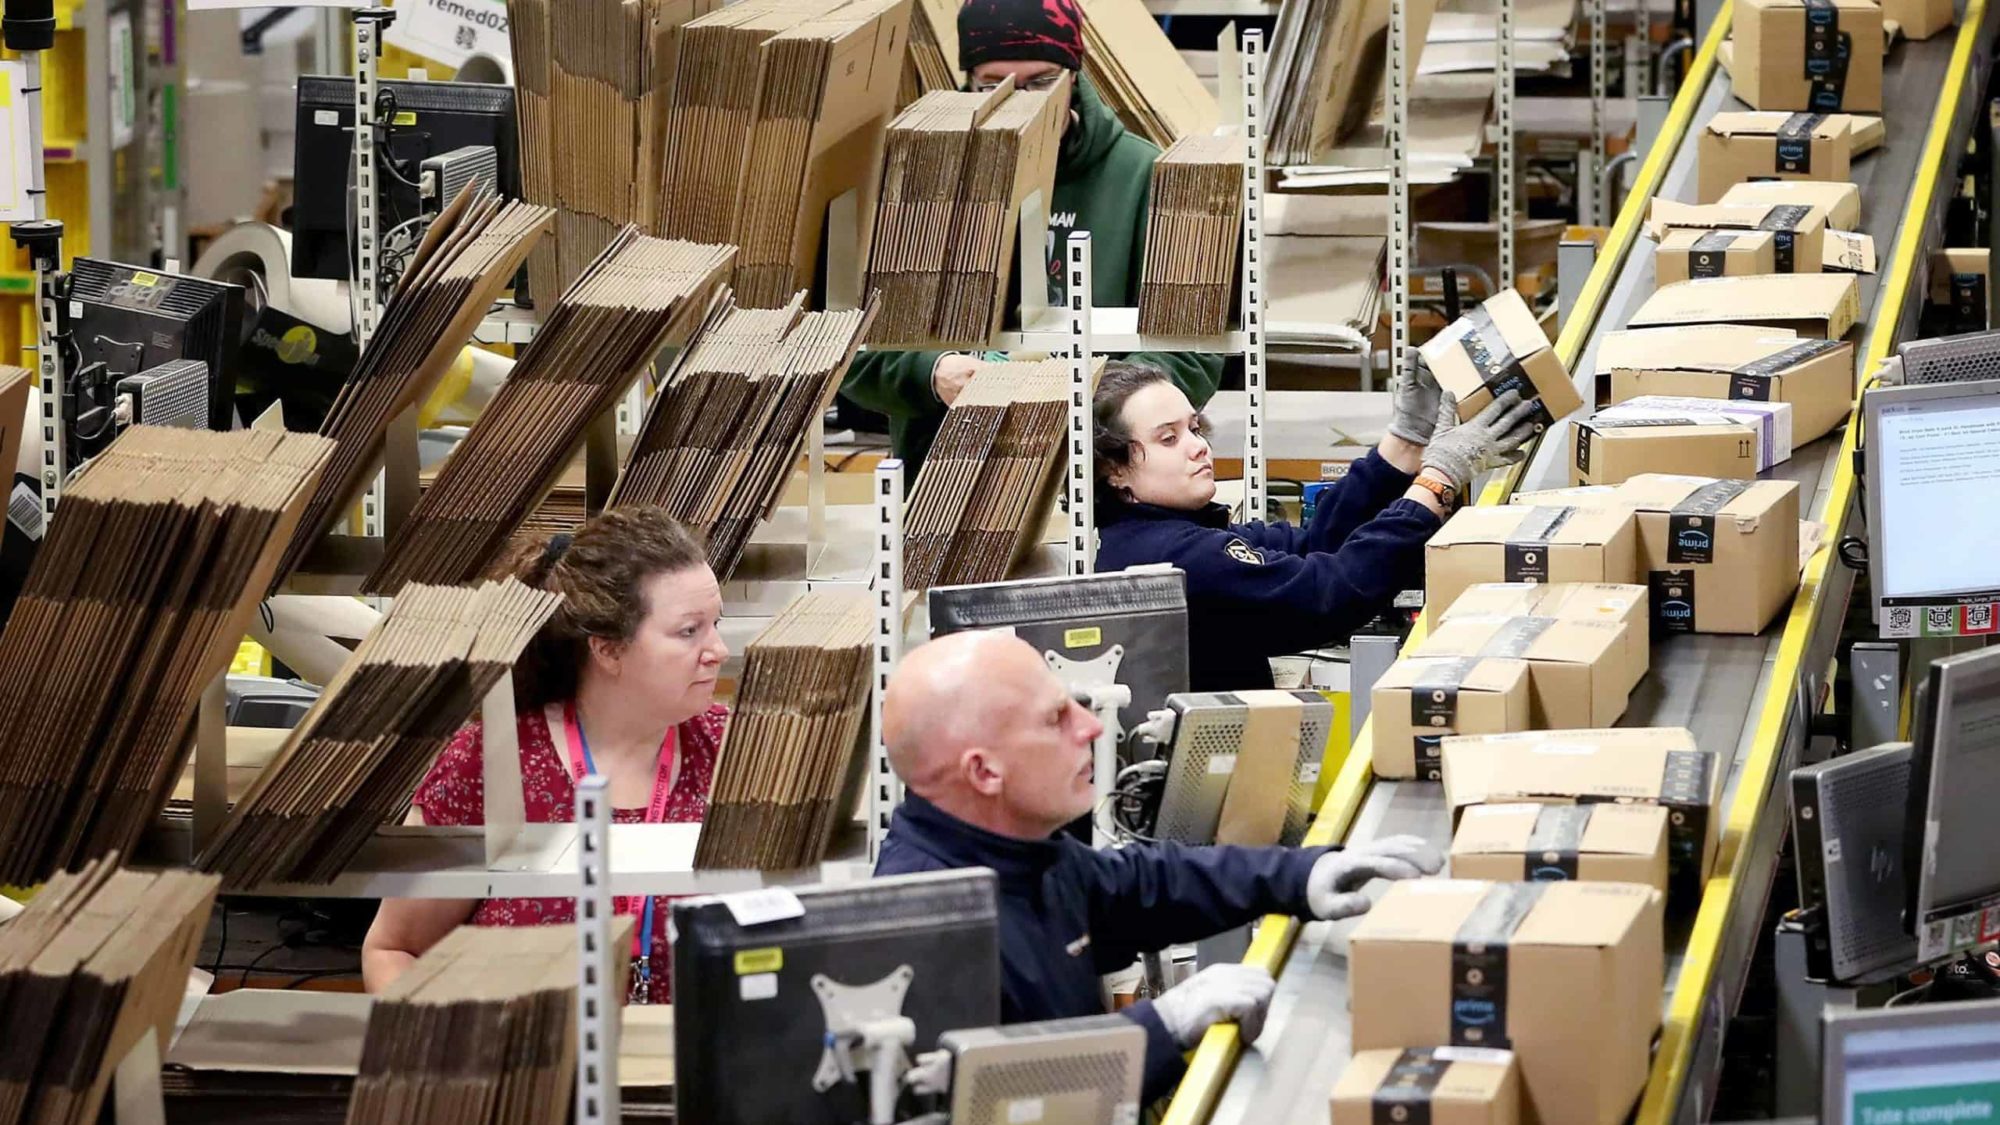 First ever Amazon strike in UK set for 25 January